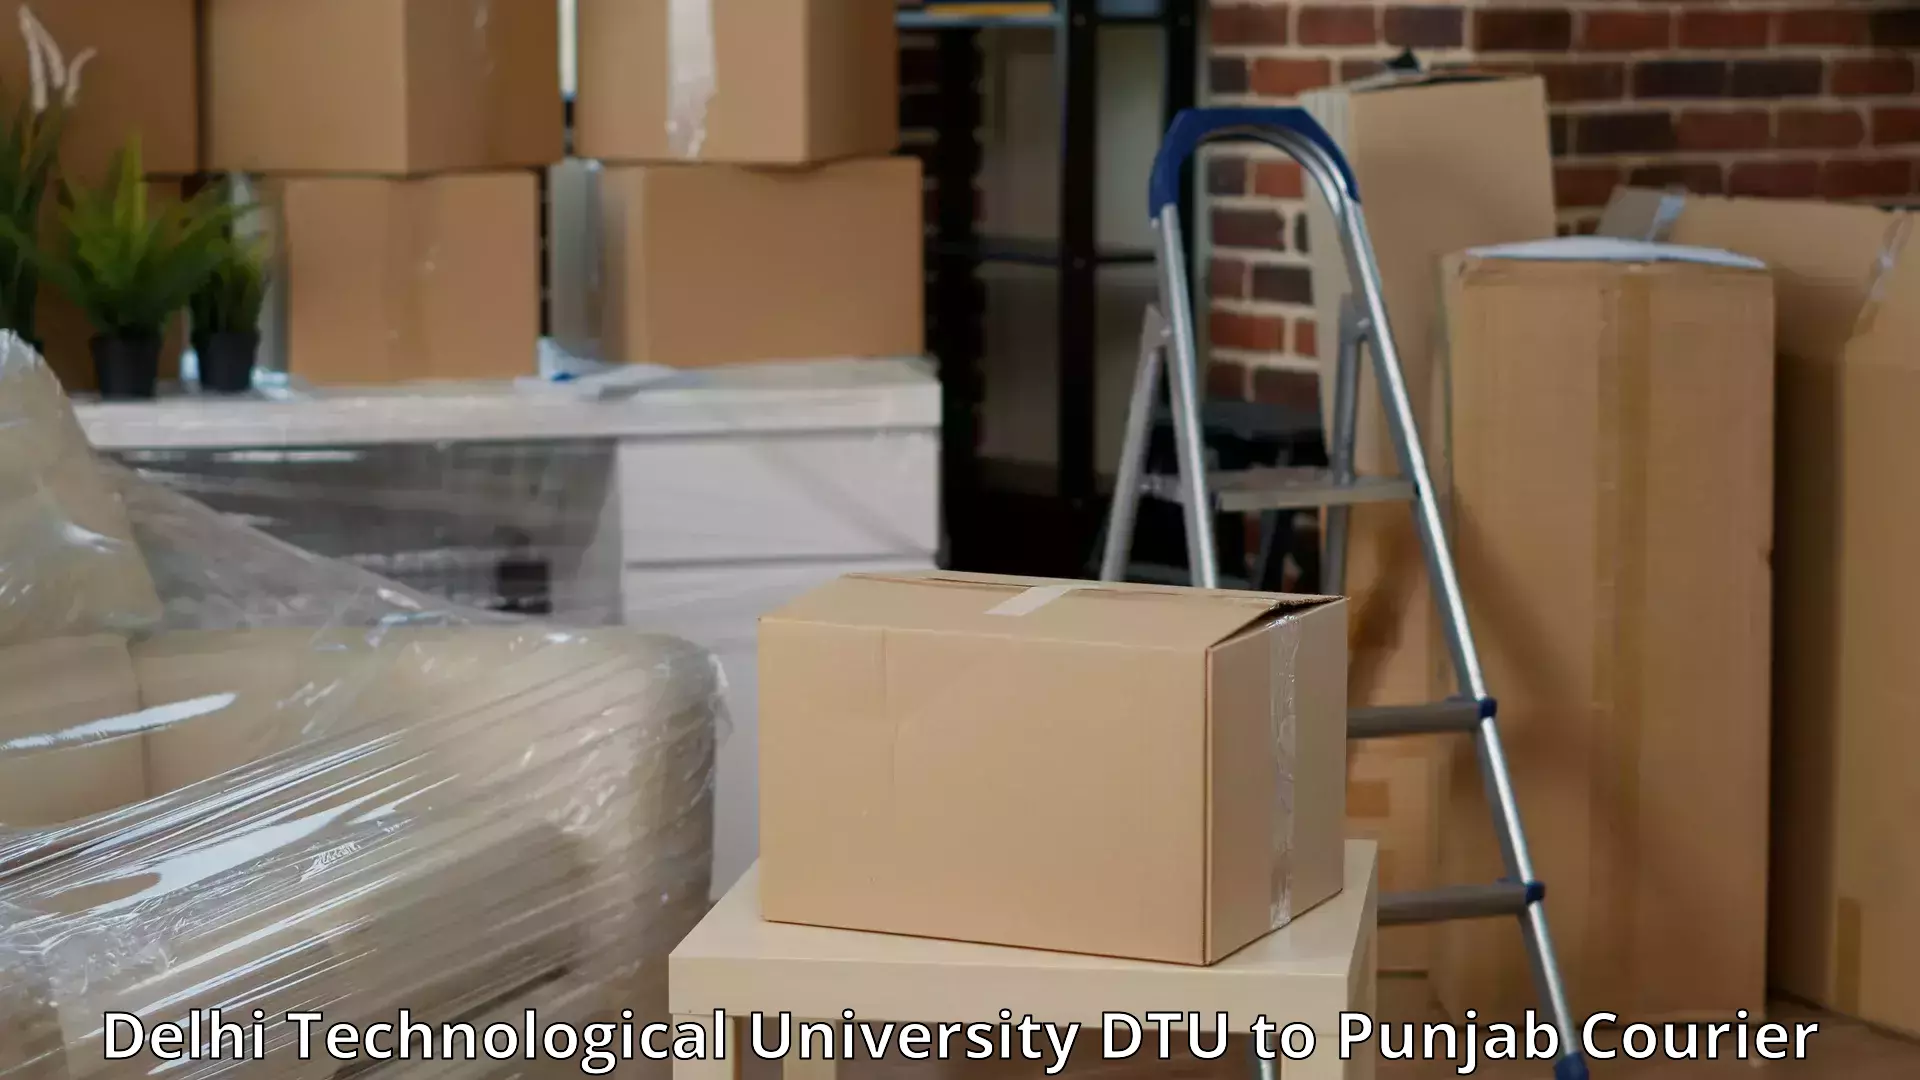 Moving and packing experts Delhi Technological University DTU to Dera Bassi